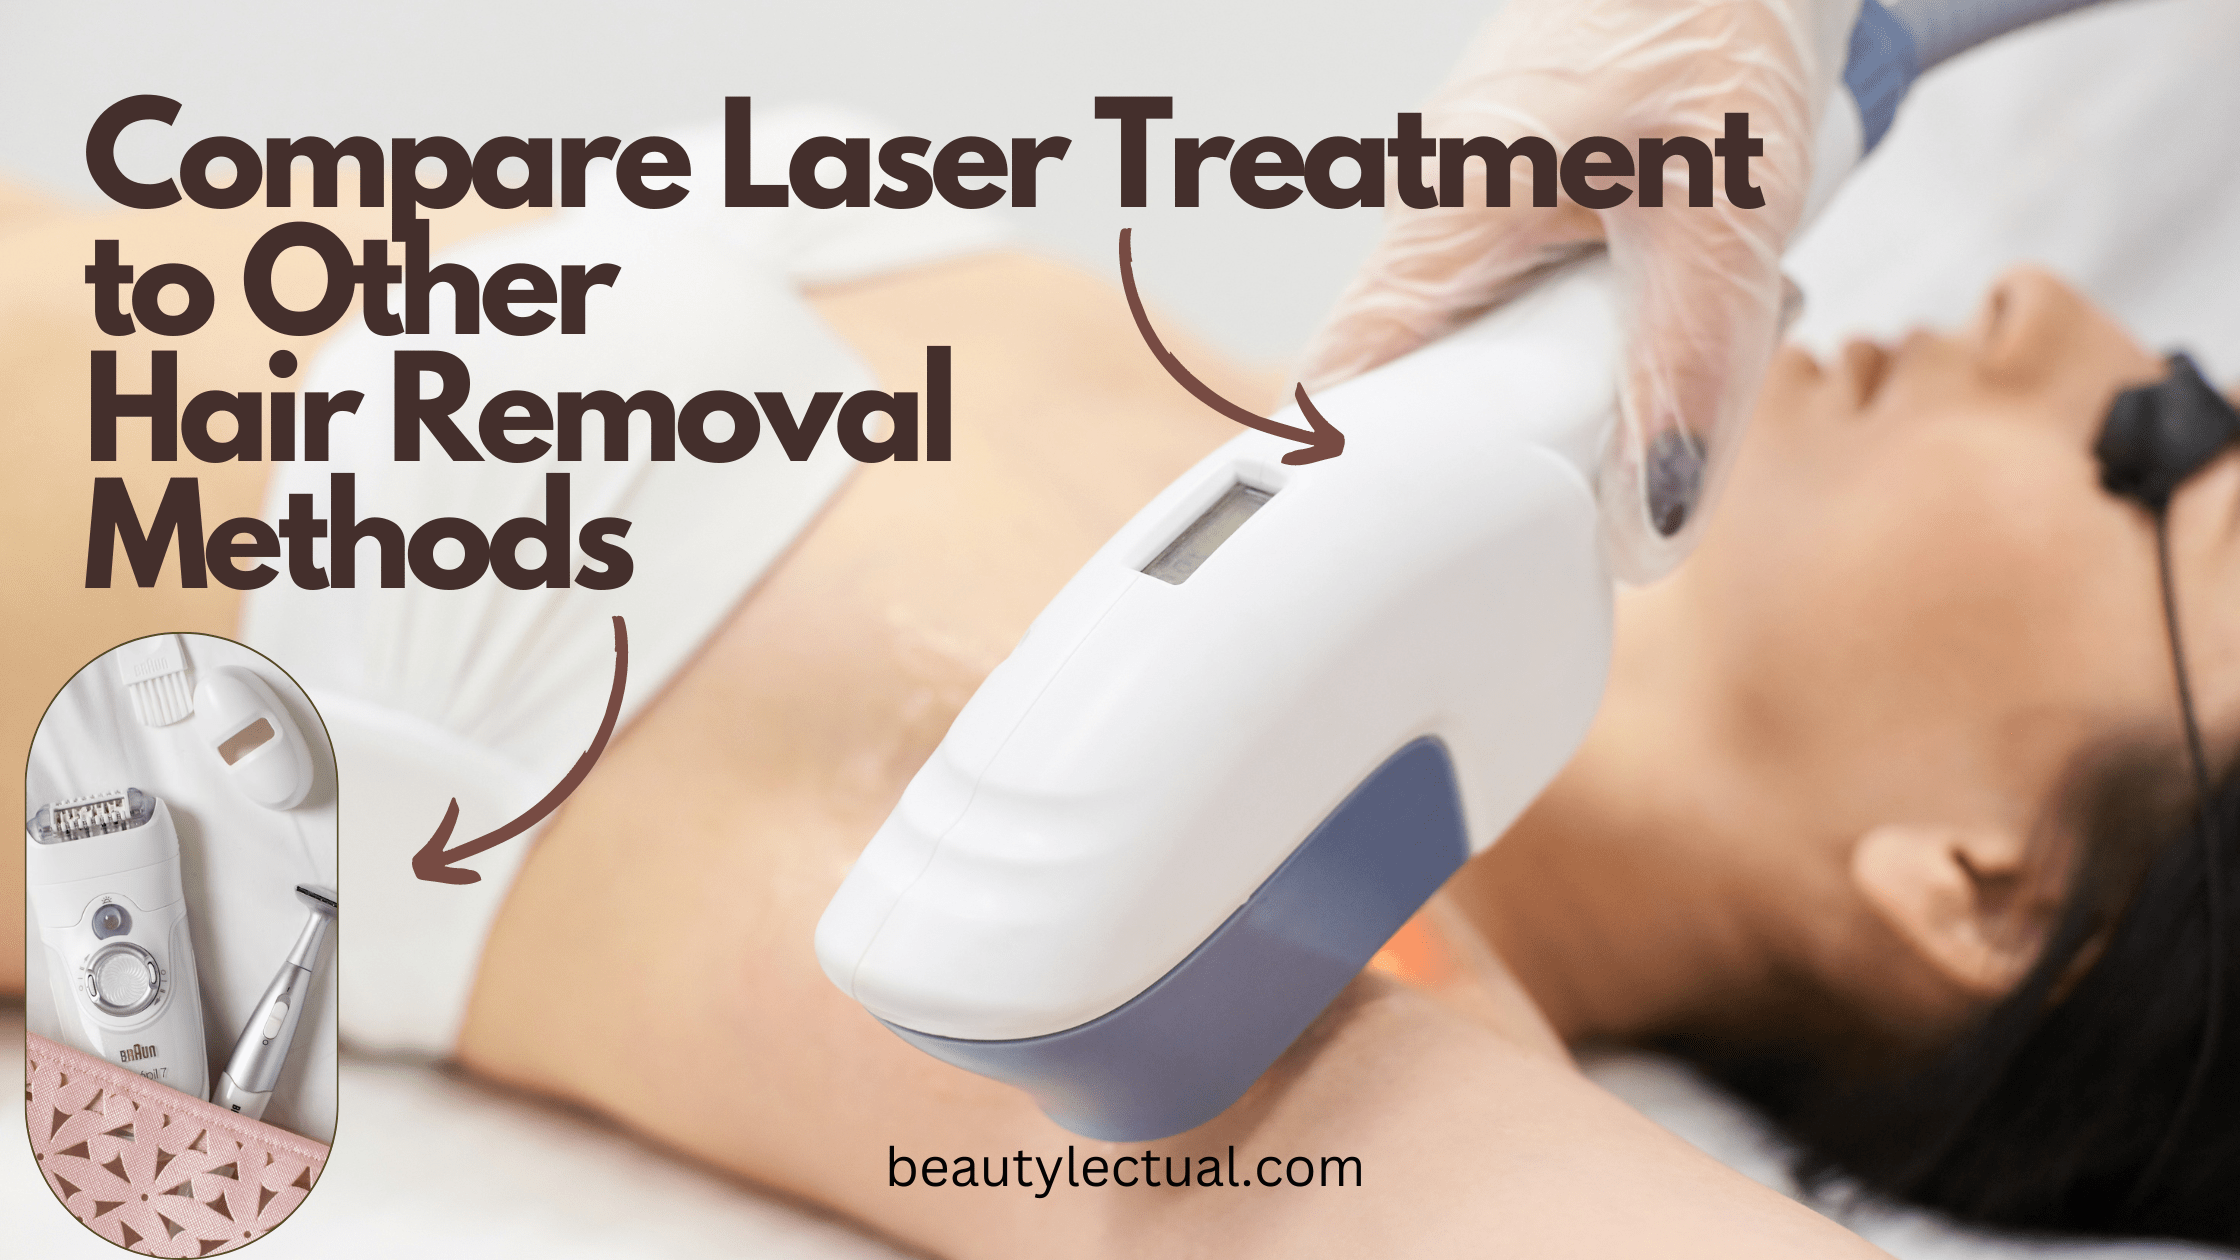 Compare Laser Treatment to Other Hair Removal Methods